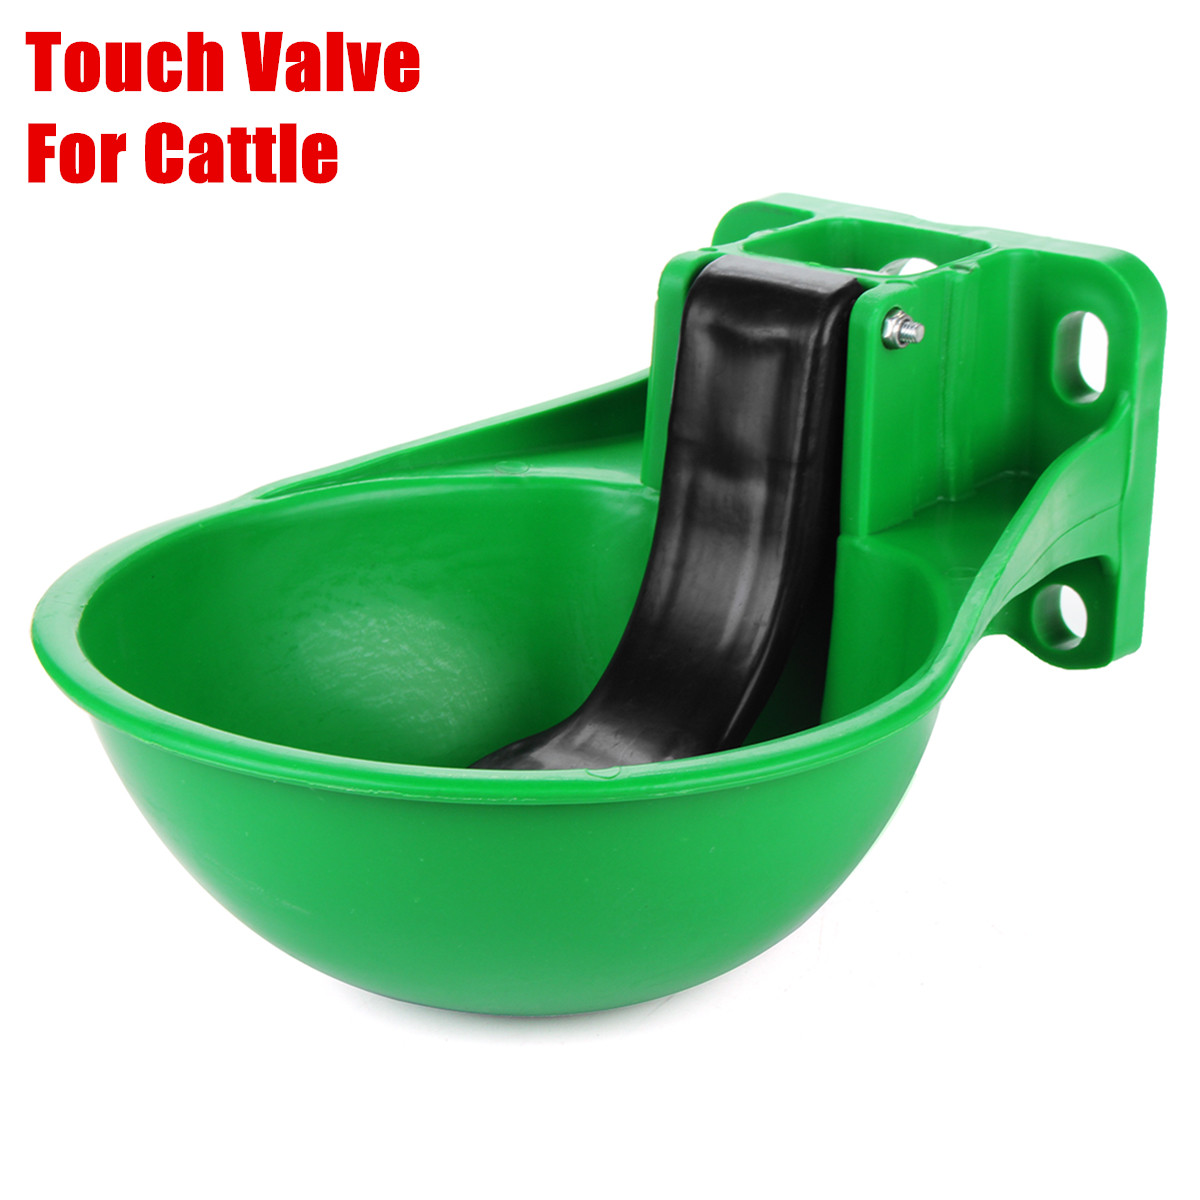 Large-Automatic-Touch-Switch-Water-Bowl-Bottle-Dispenser-Farm-Cow-Horse-Drinking-Waterer-1385253-3